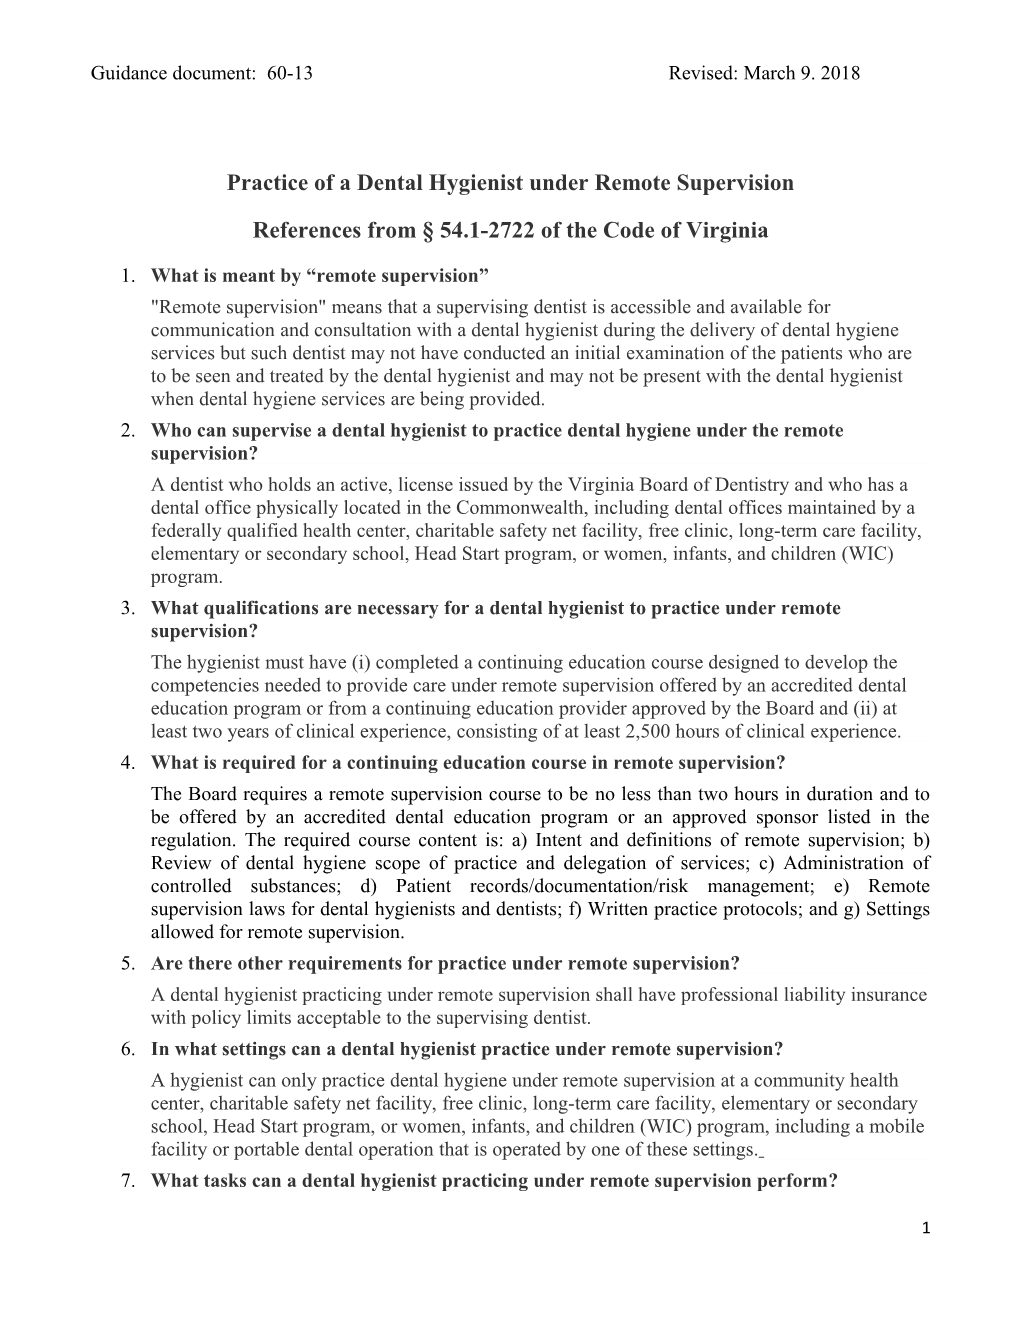 Guidance Document: 60-13: Practice of a Dental Hygienist Under Remote Supervision